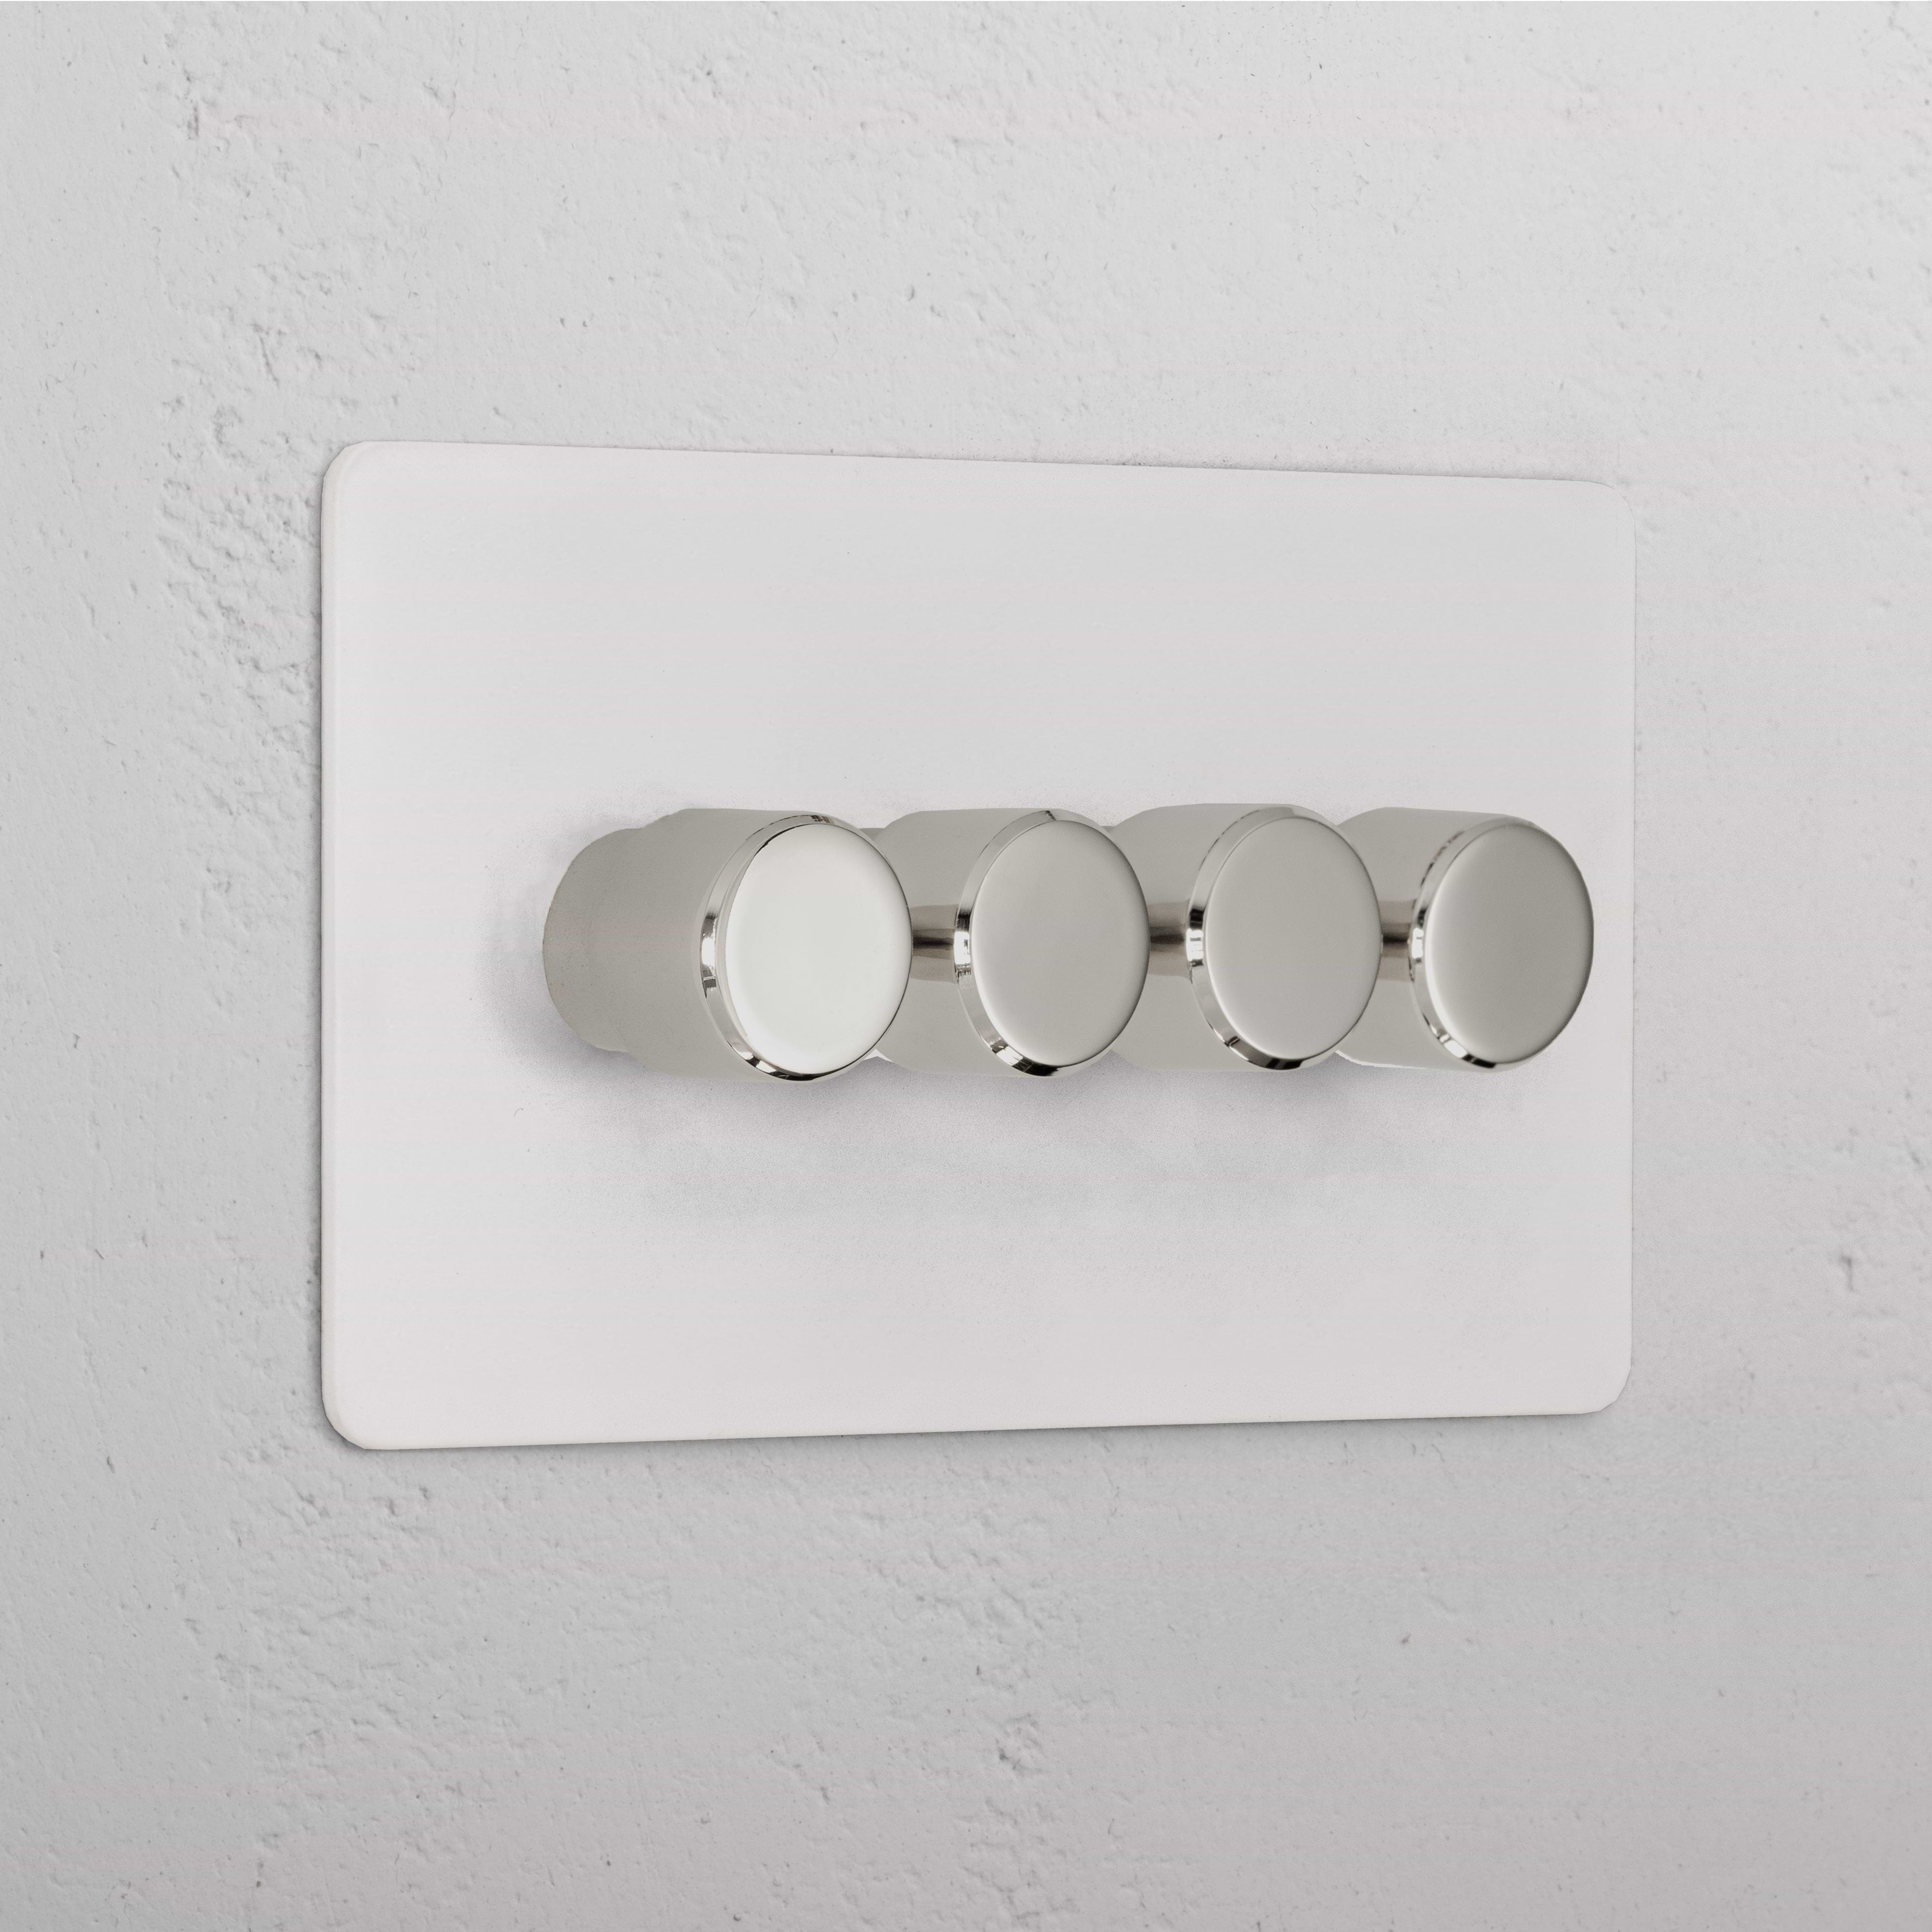 4G Dimmer Switch - Paintable Polished Nickel